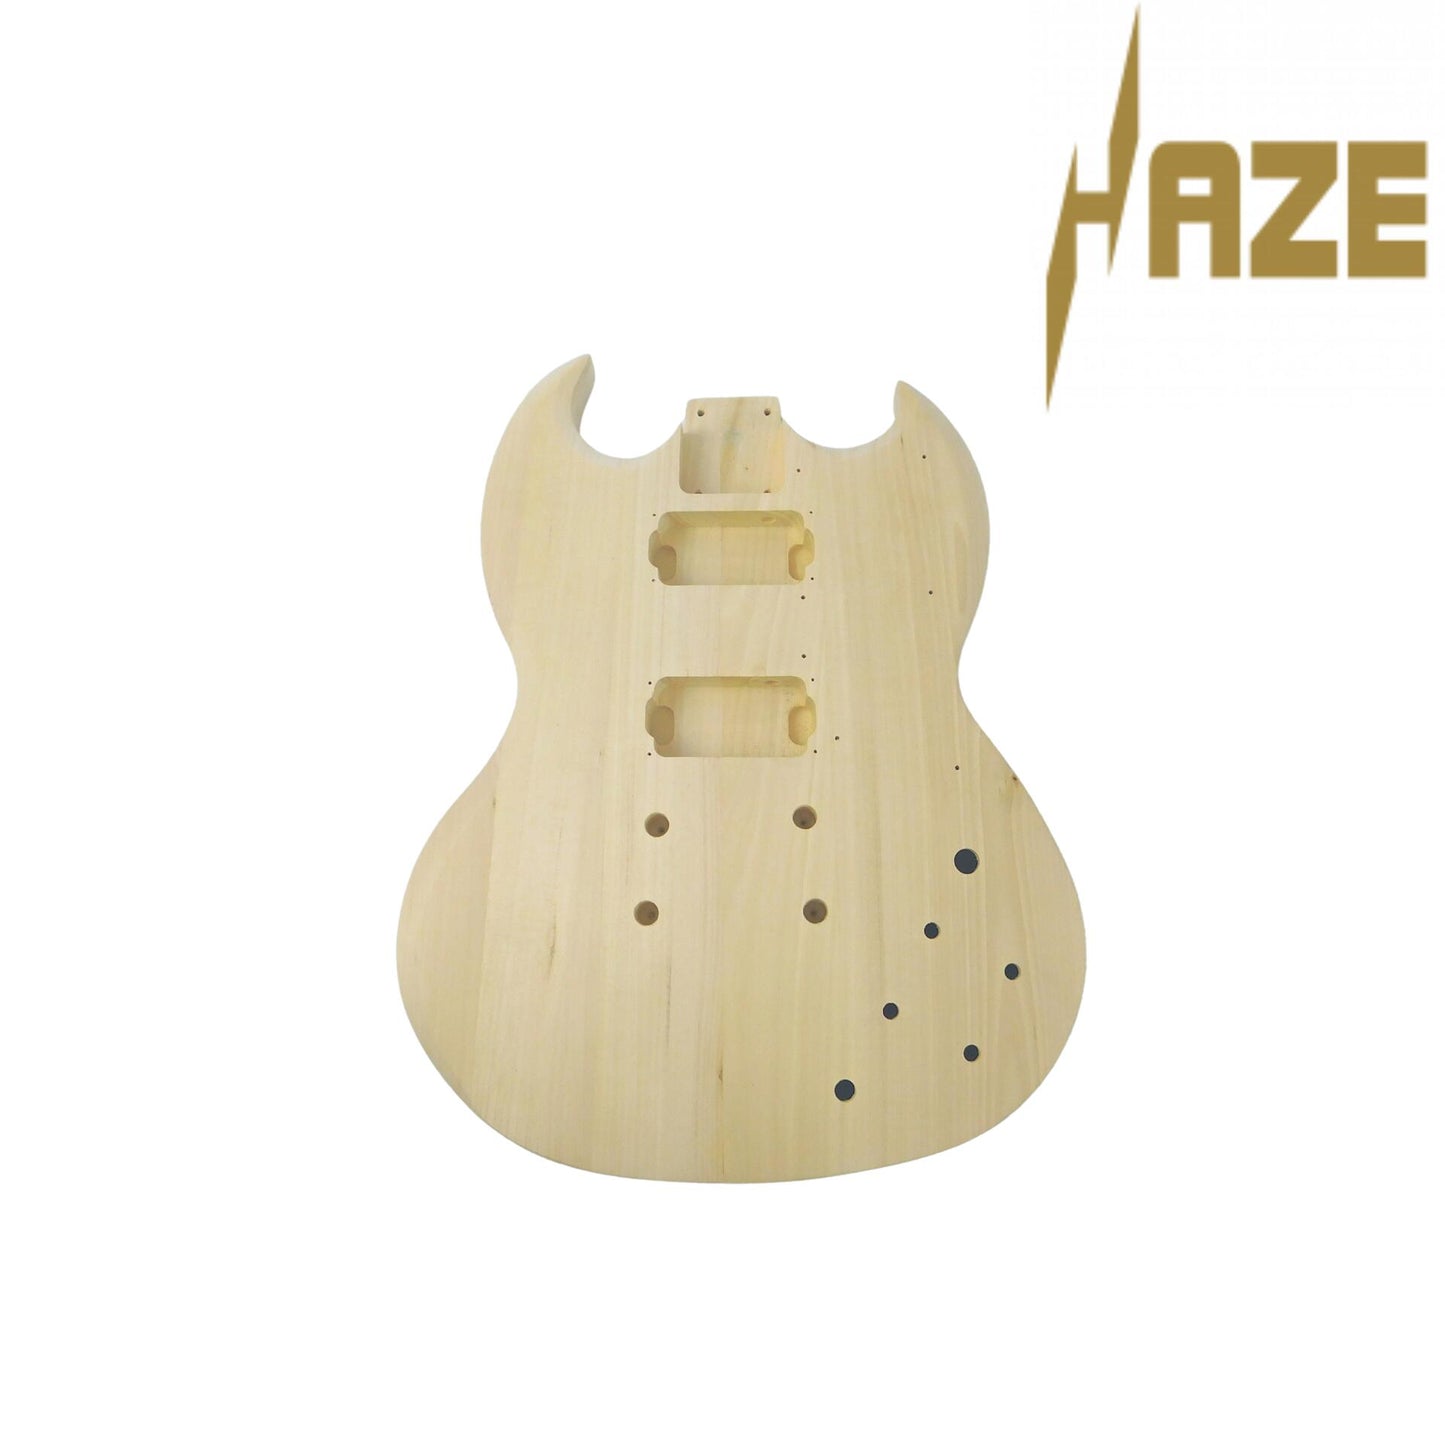 Haze SG Electric Guitar DIY, Solid Basswood body and Maple neck, No-Soldering, HSSG19200DIY